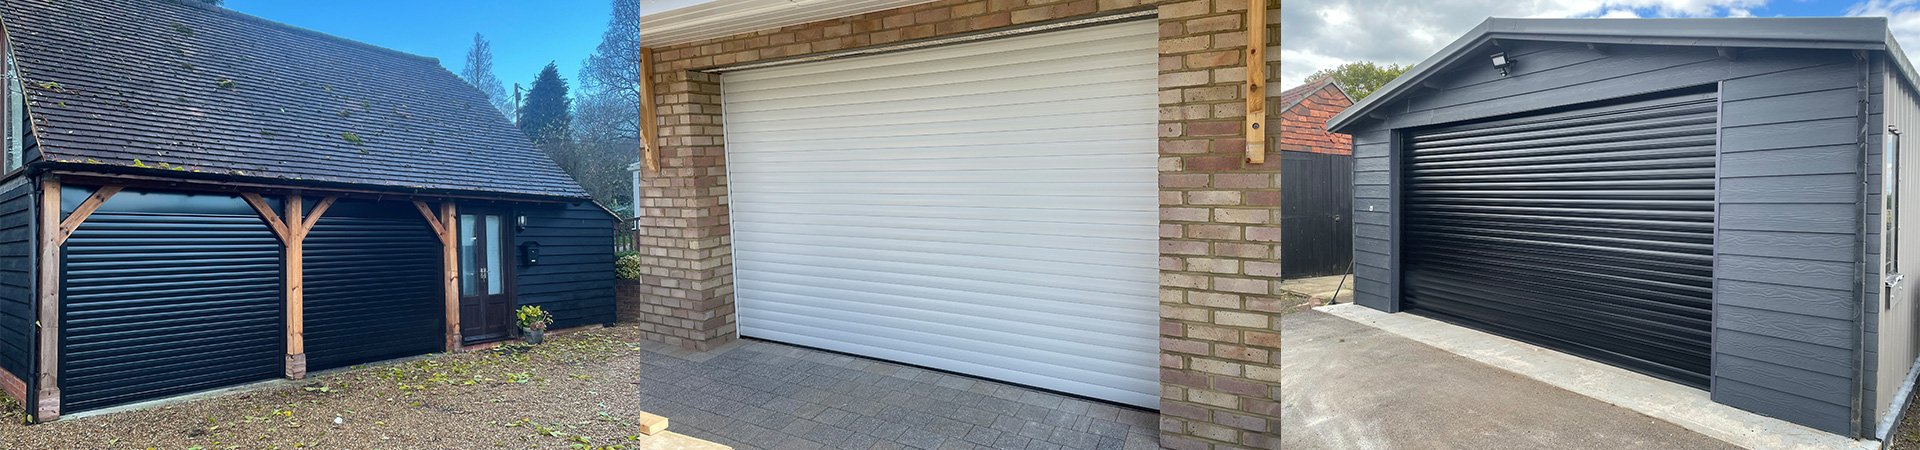 Garage roller doors by Wanstall-Limited